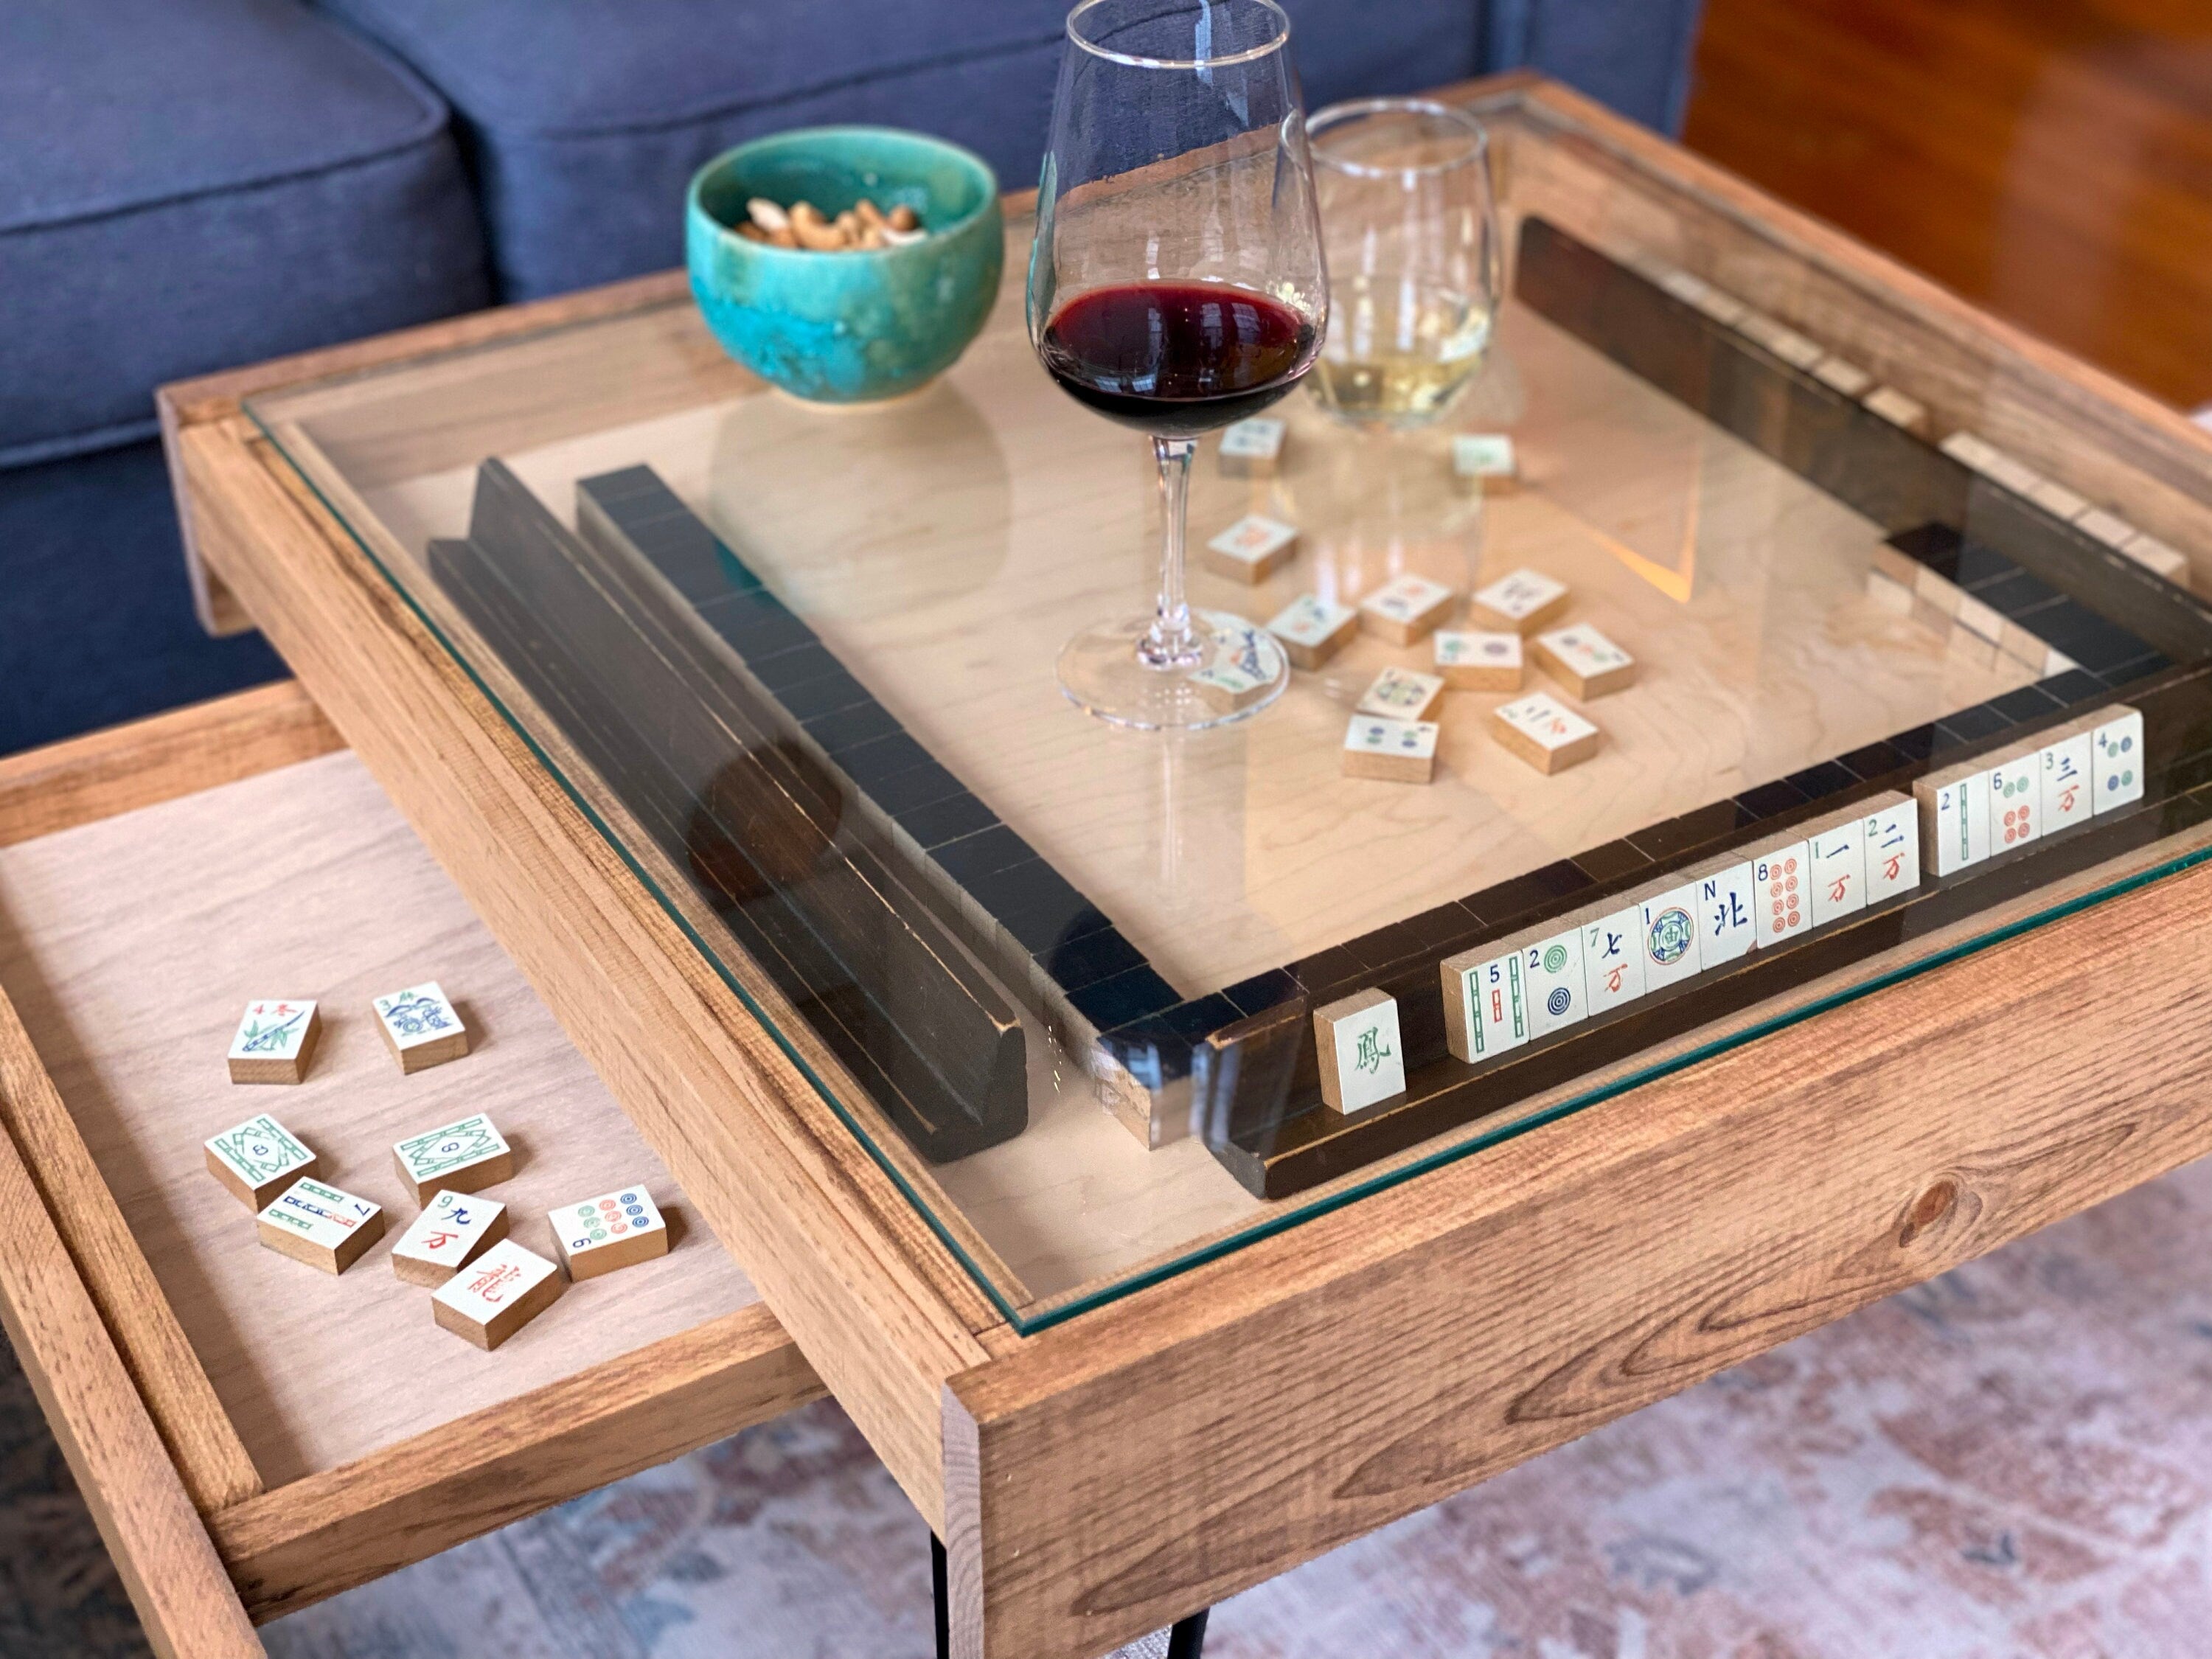 Rustic BYO Board Game Table with Removable Tempered Glass Top and Hidden Storage Drawer - 100% Made in the USA. Measures 25x25"